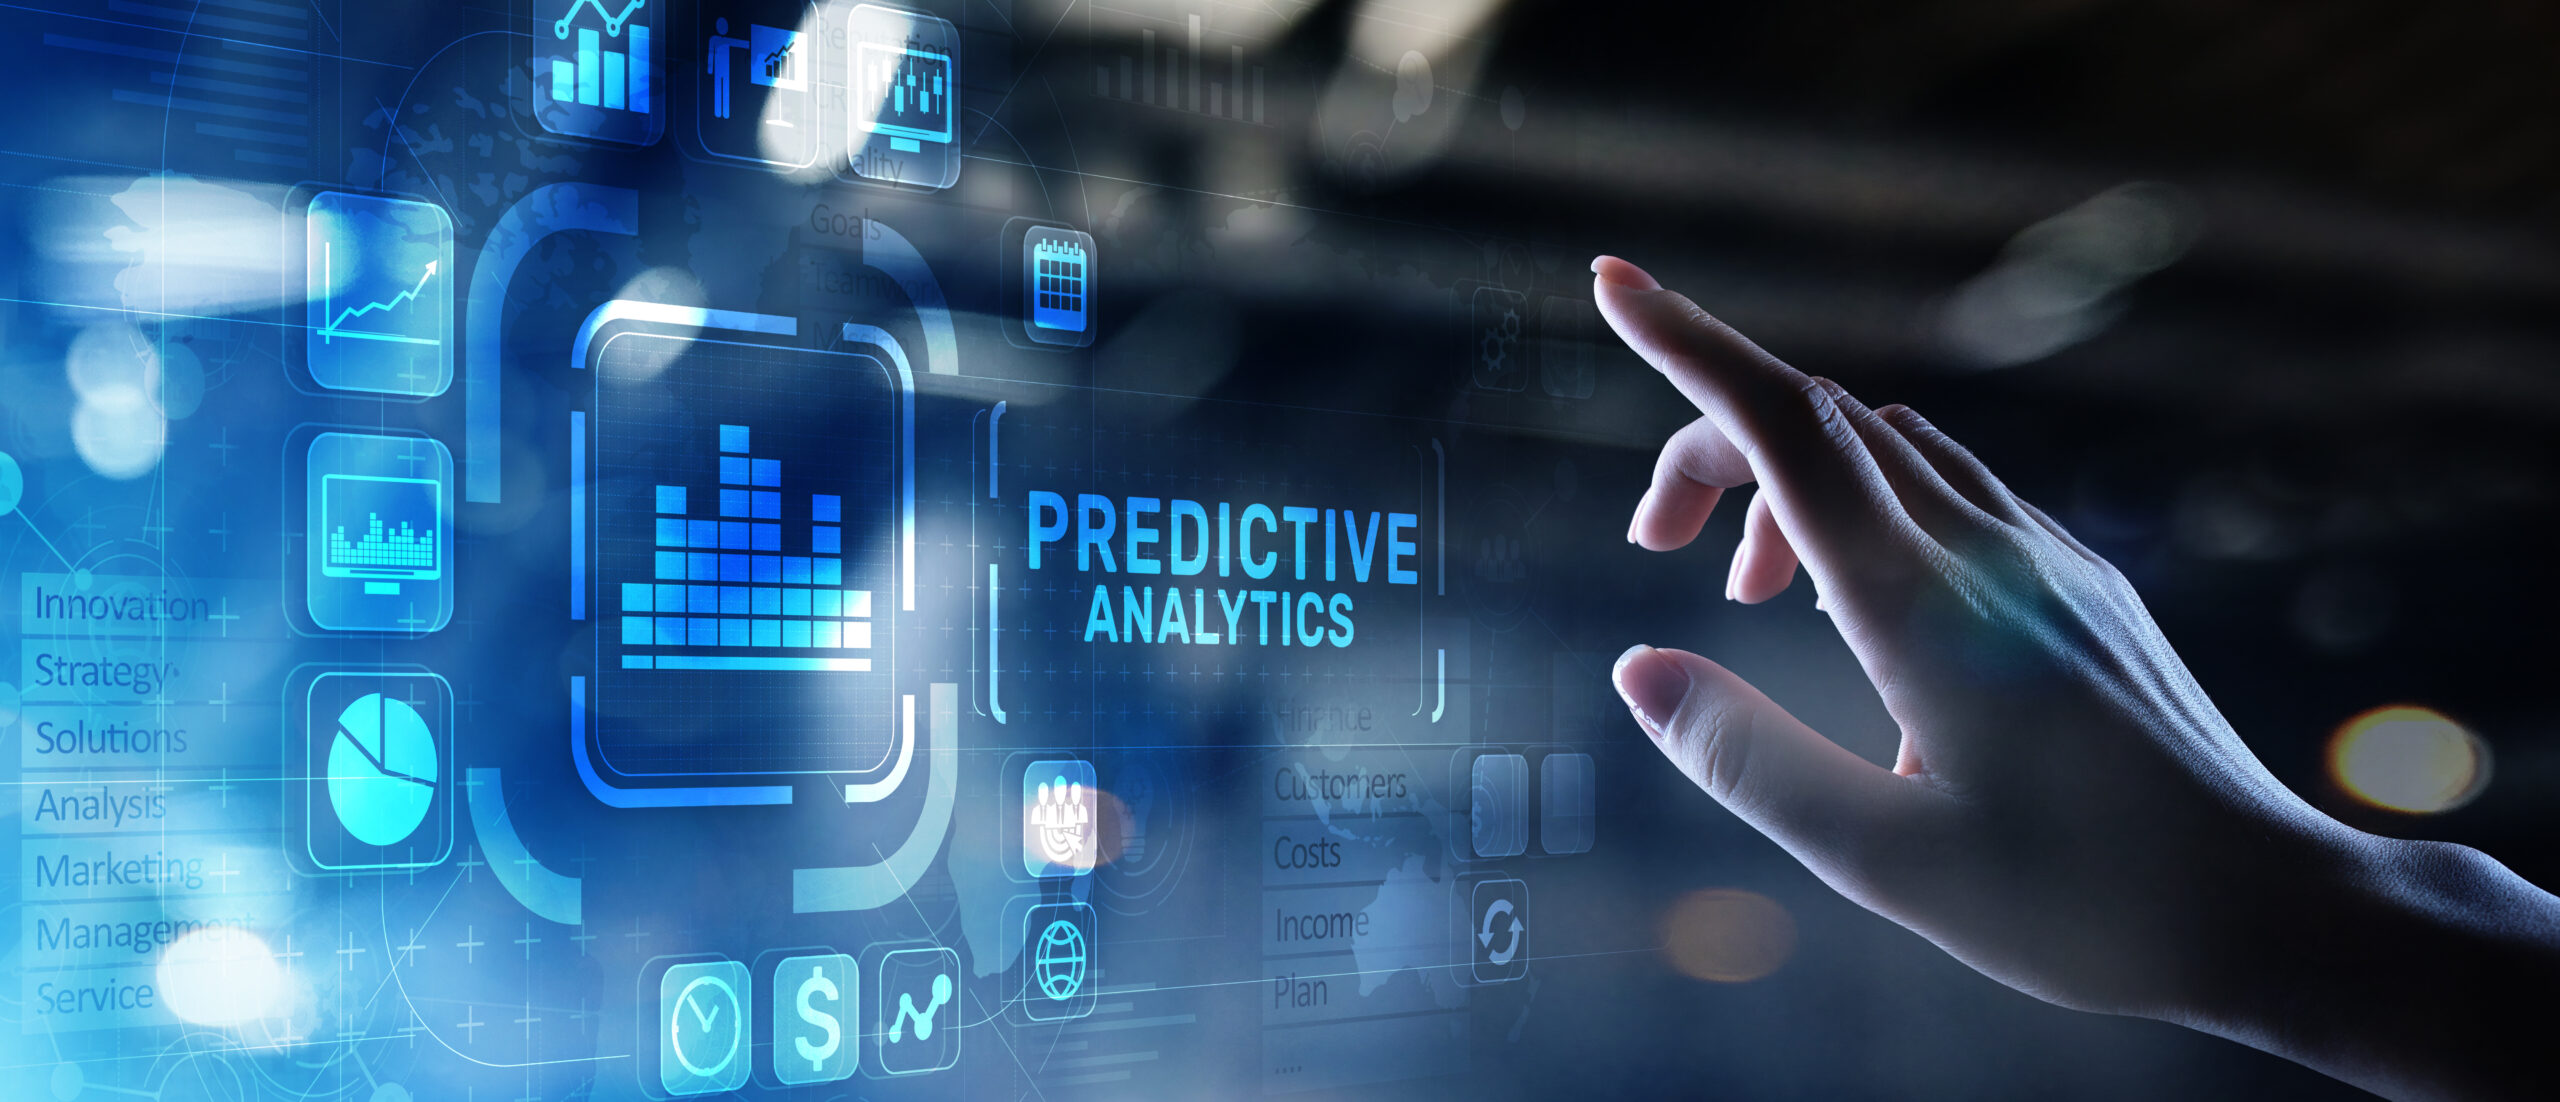 Print Industry Veterans Unveil Advanced Predictive Analytics and Data Collection Solution